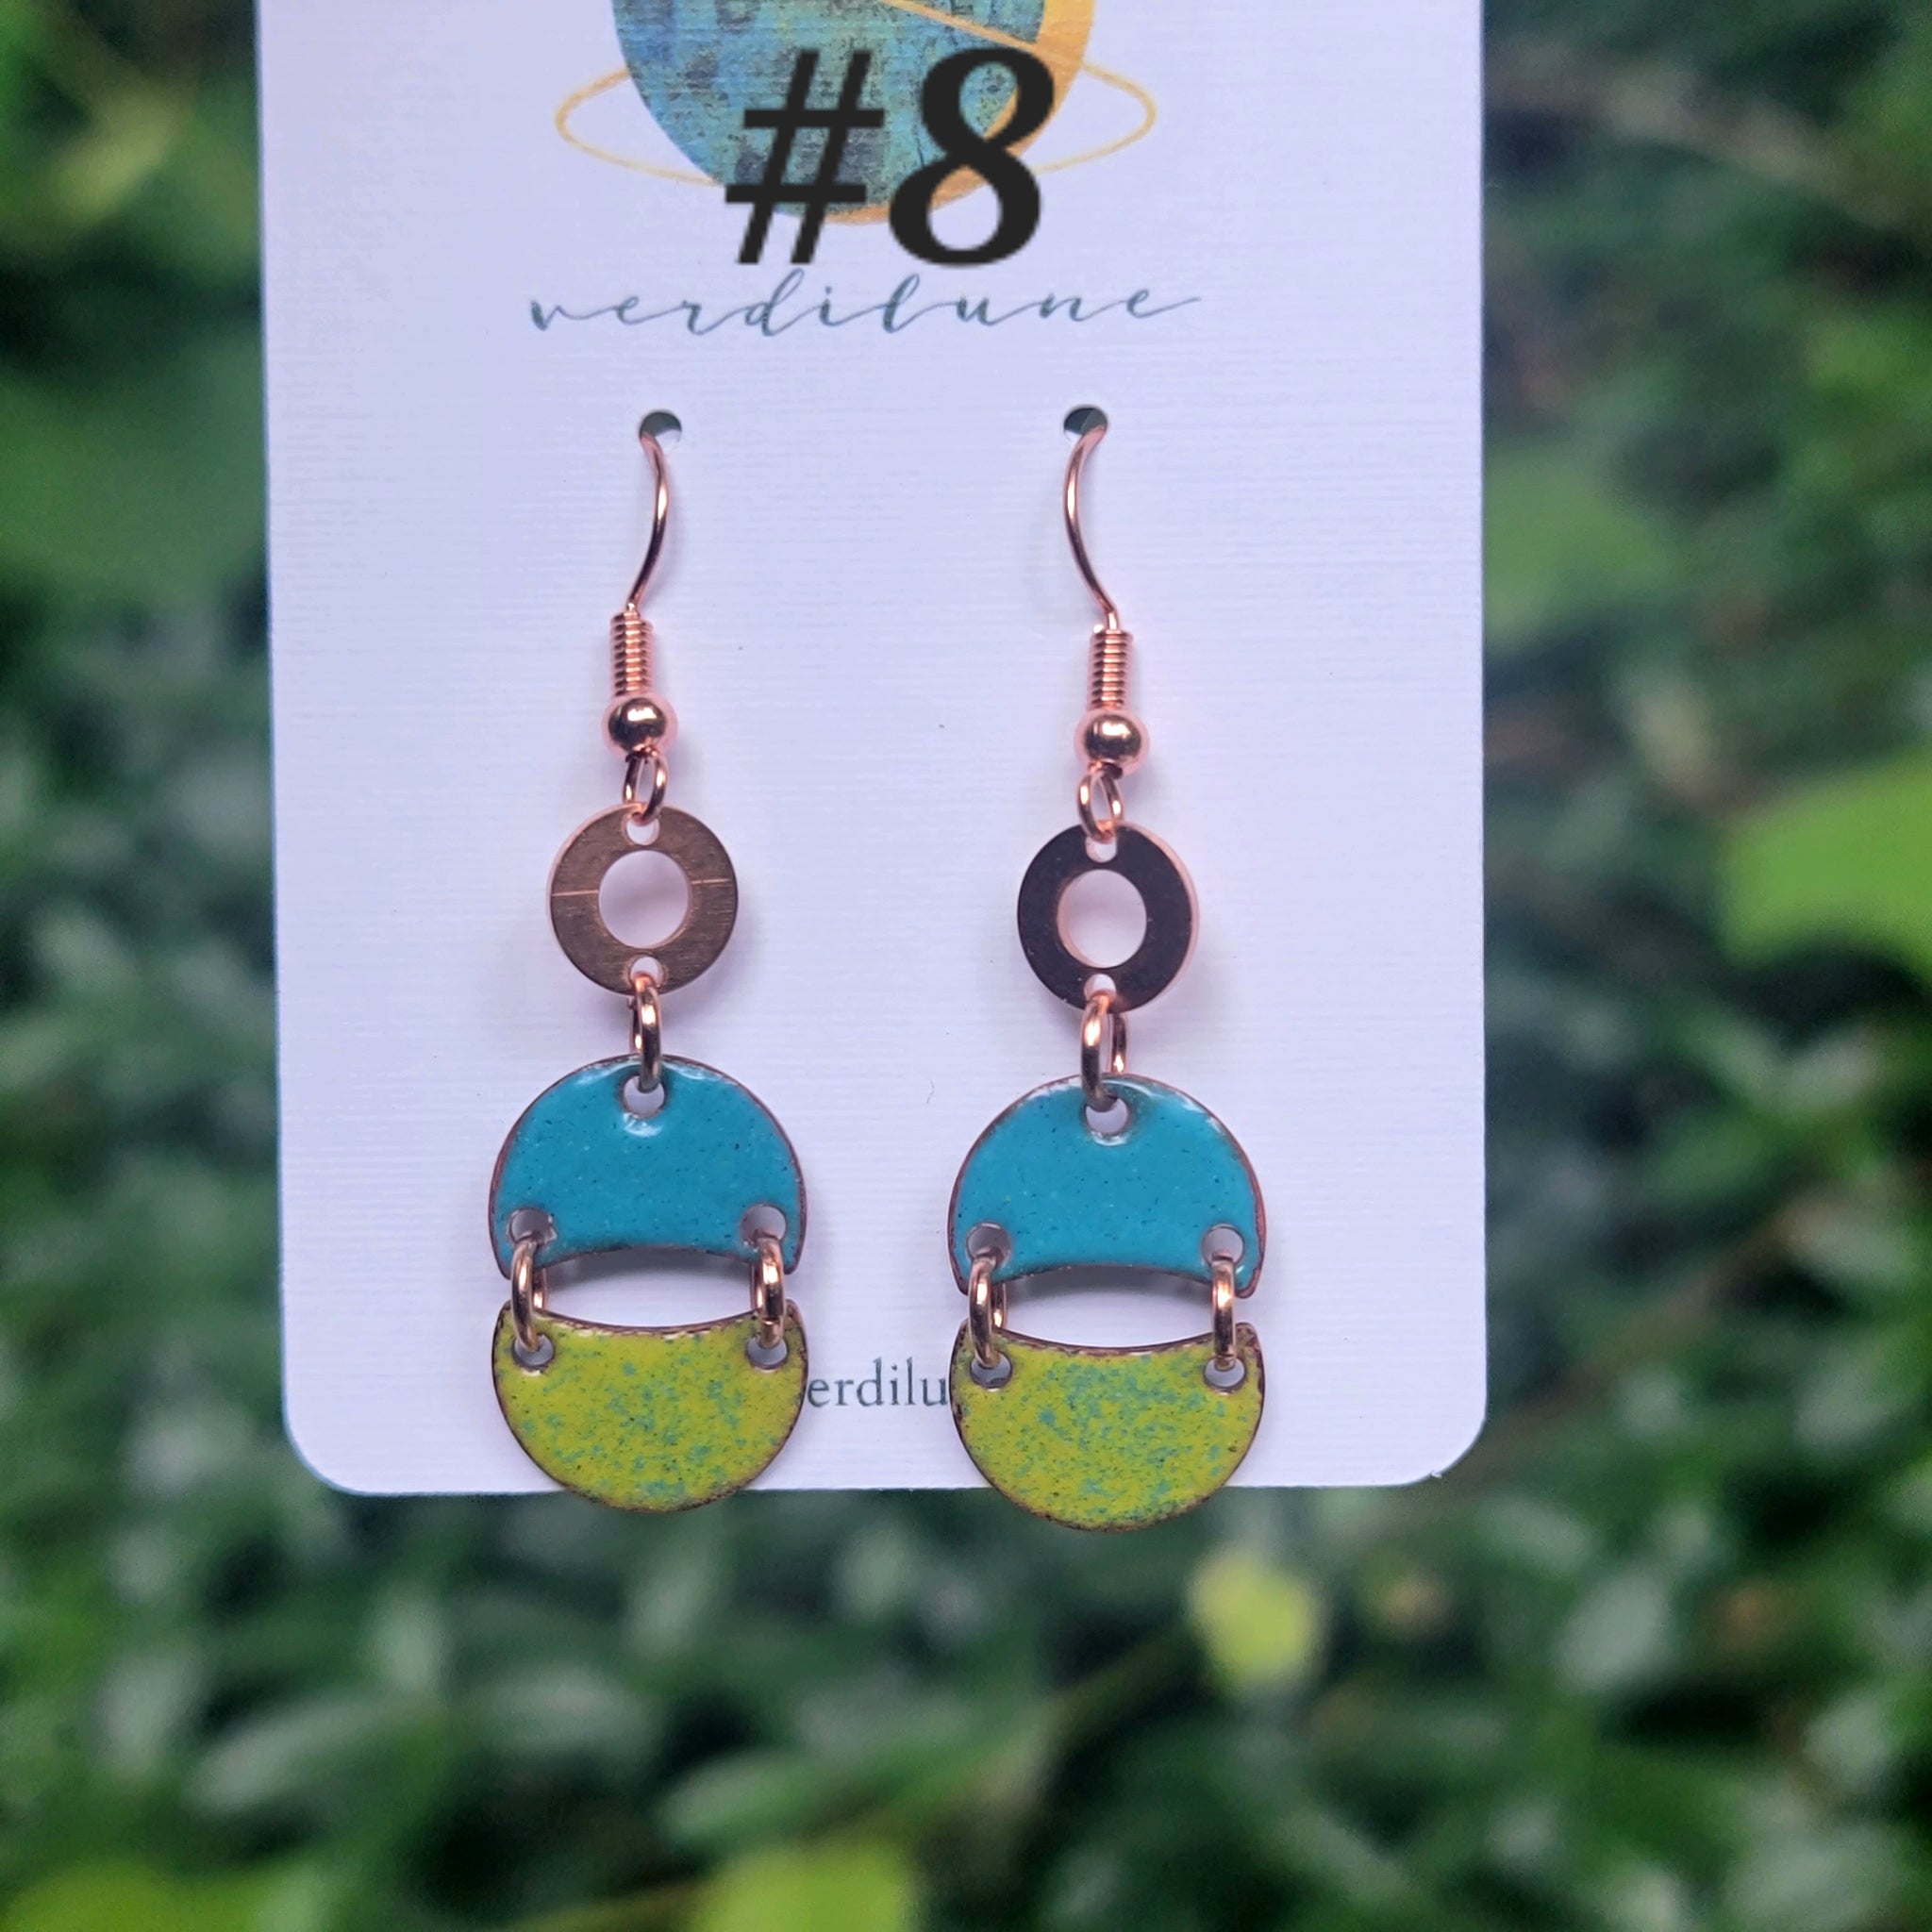 Enameled Copper Collection - Summer Edition